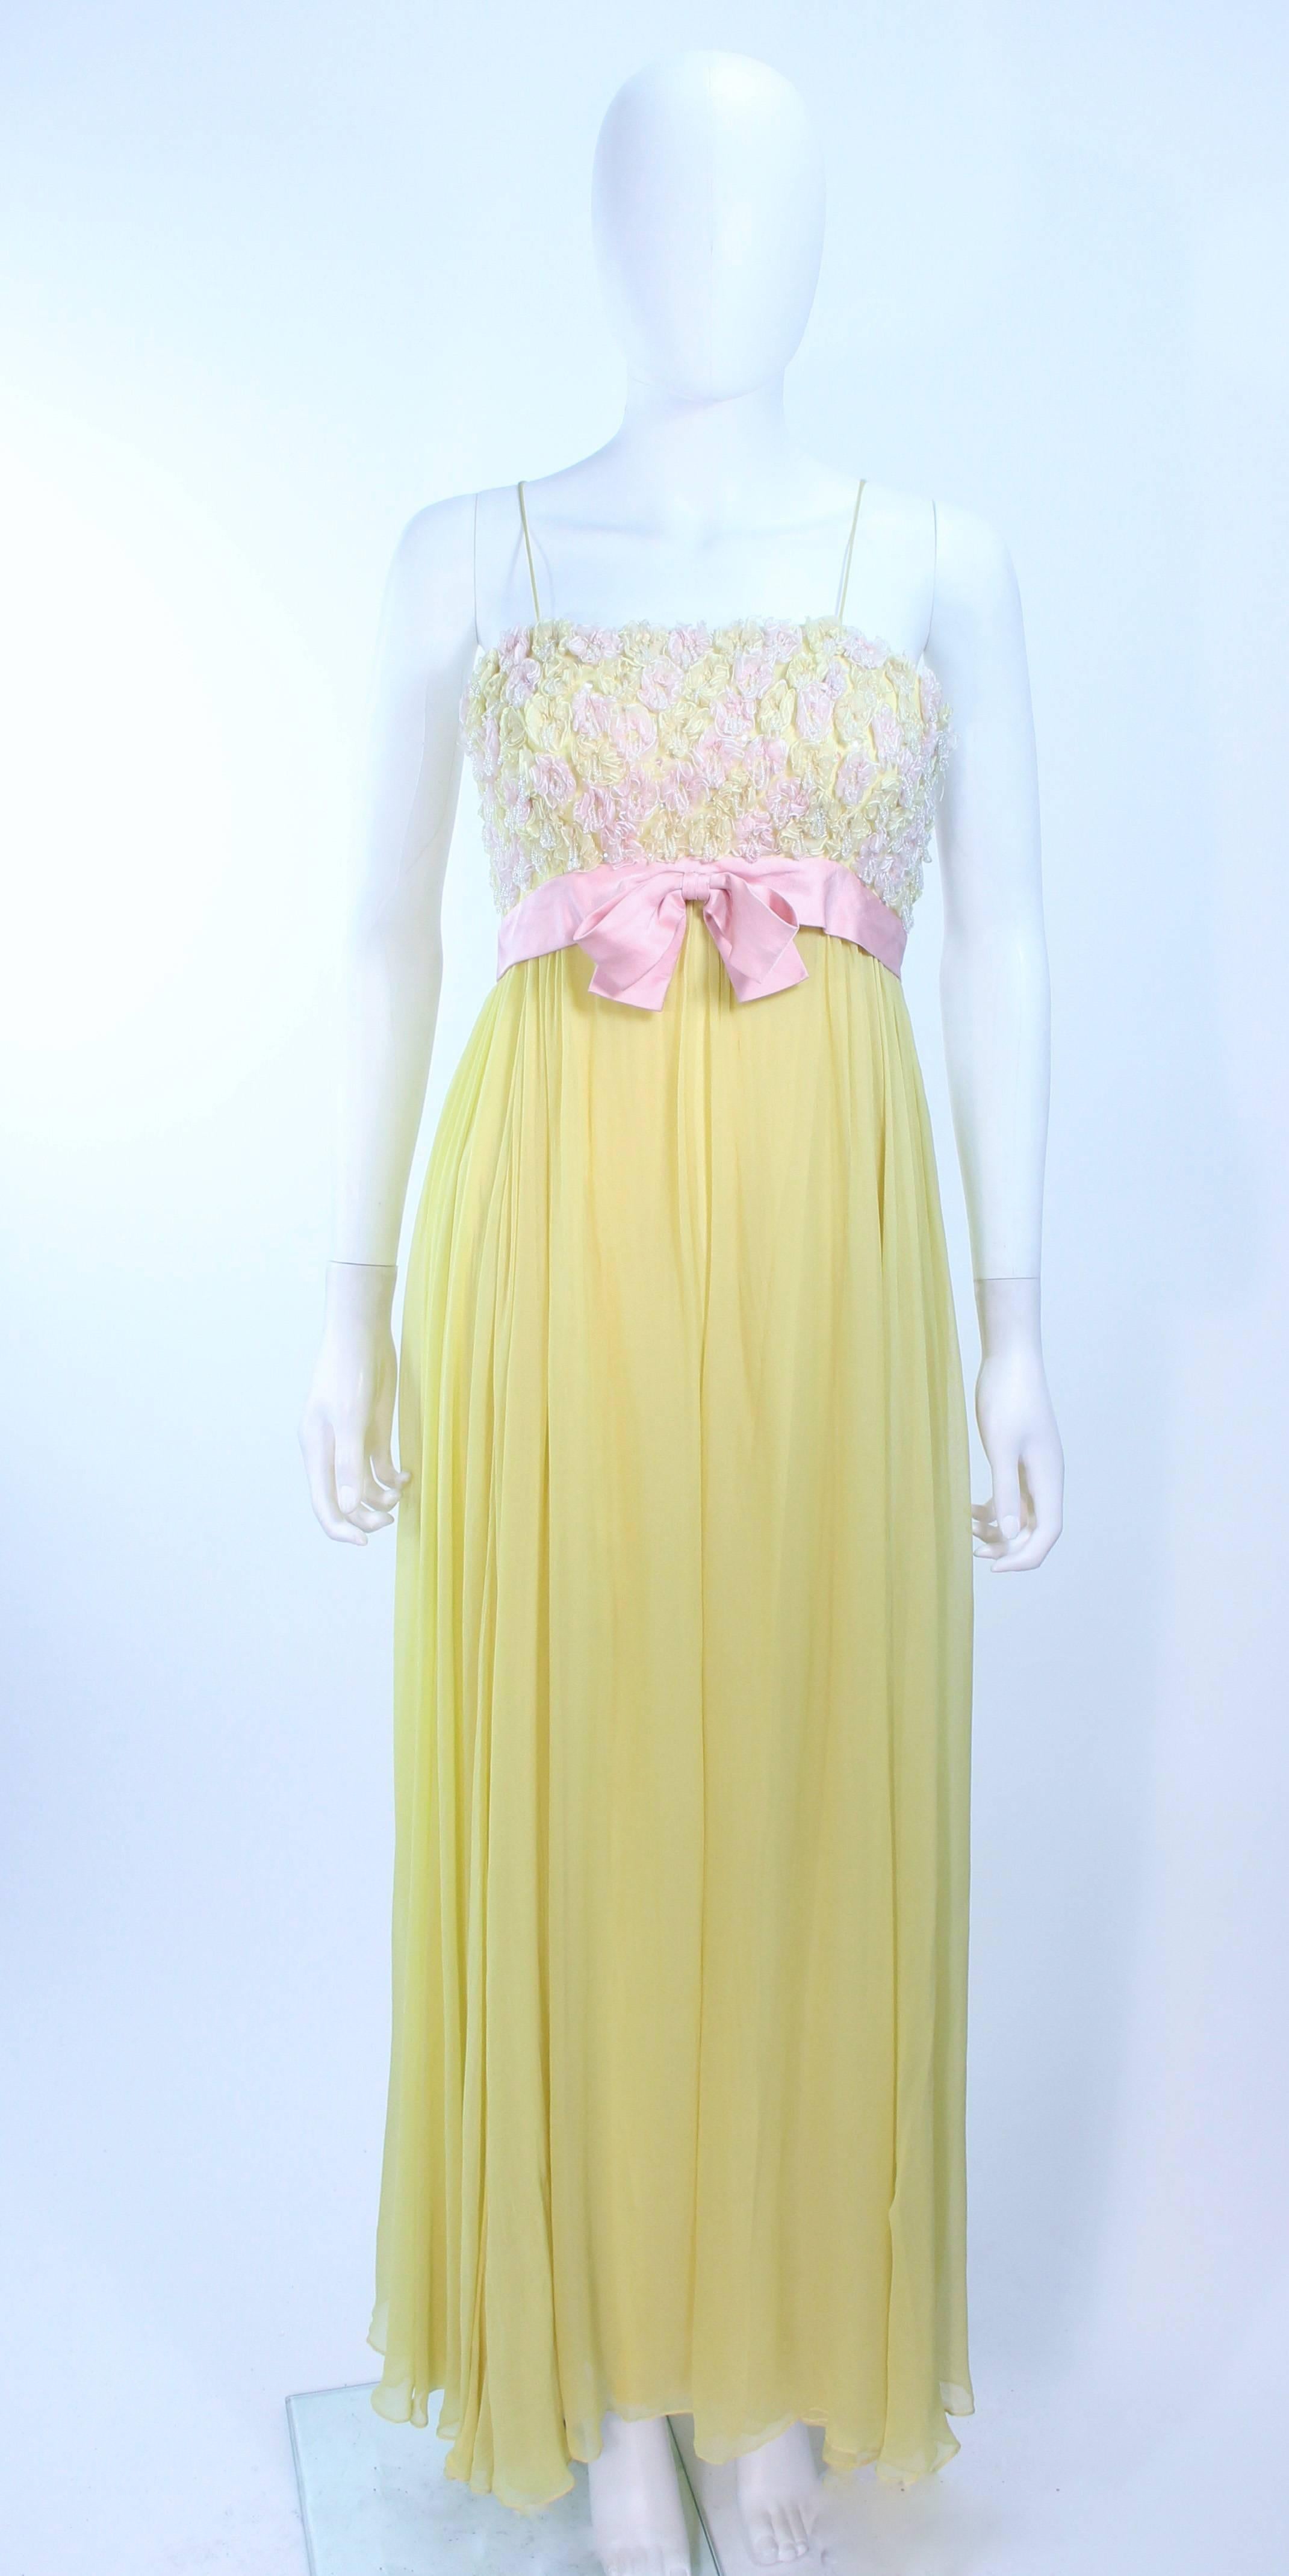 This Victoria Royal gown is composed of a yellow silk chiffon with pink floral applique and rhinestones. There is a center back zipper closure. In excellent vintage condition, one small mend on the skirt, barely visible.

**Please cross-reference